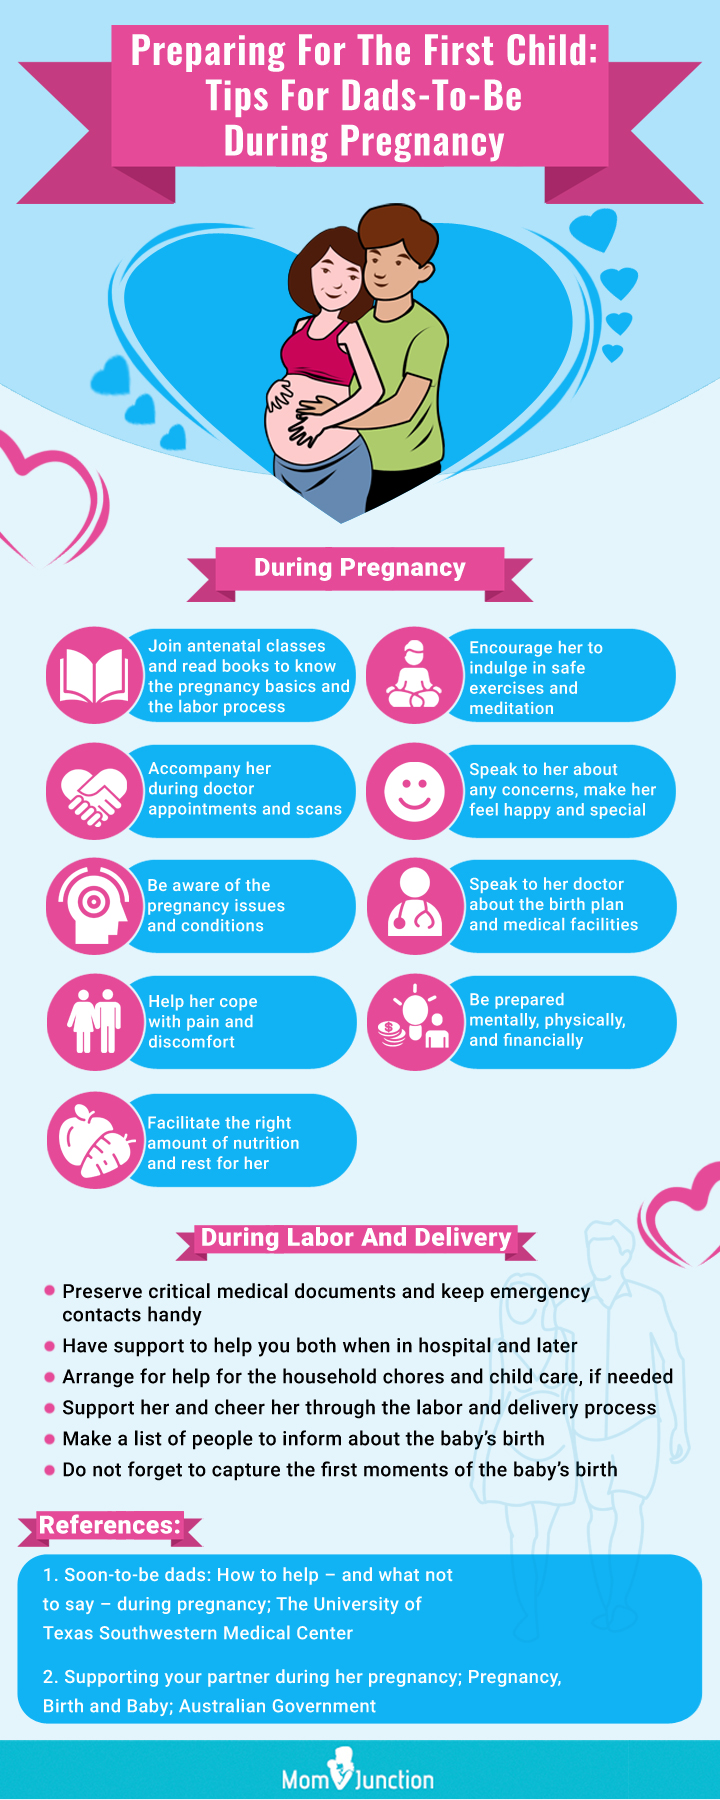 Top 13 Fears About Pregnancy to Feel Better About